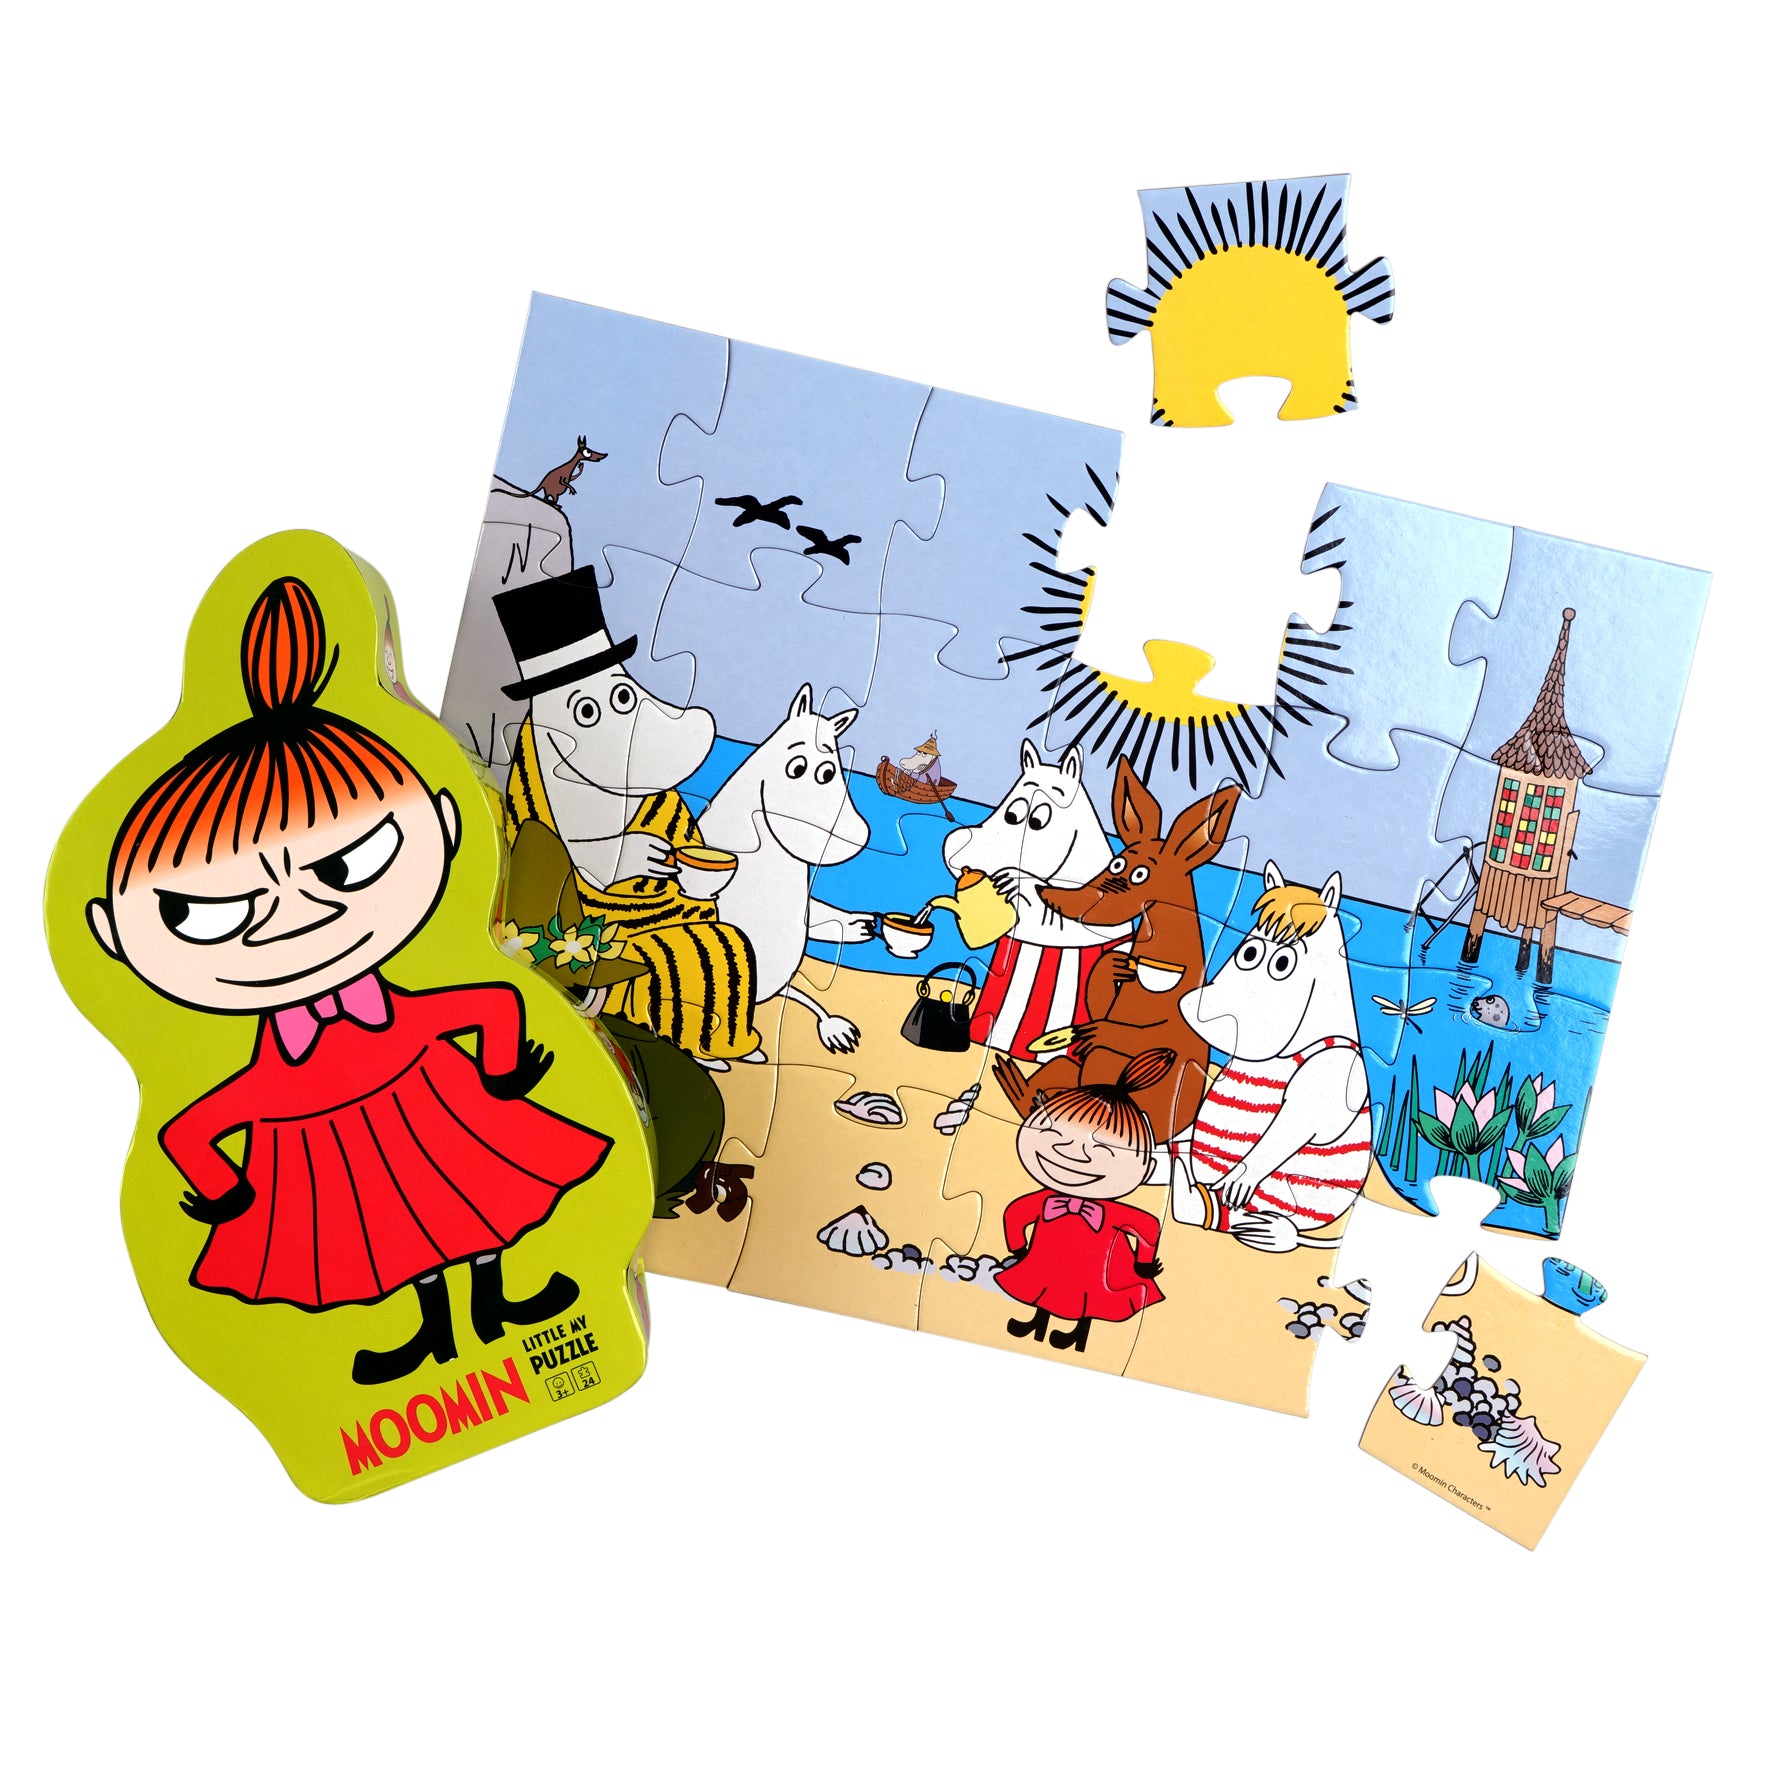 moomin little my deco puzzle box and puzzle pieces